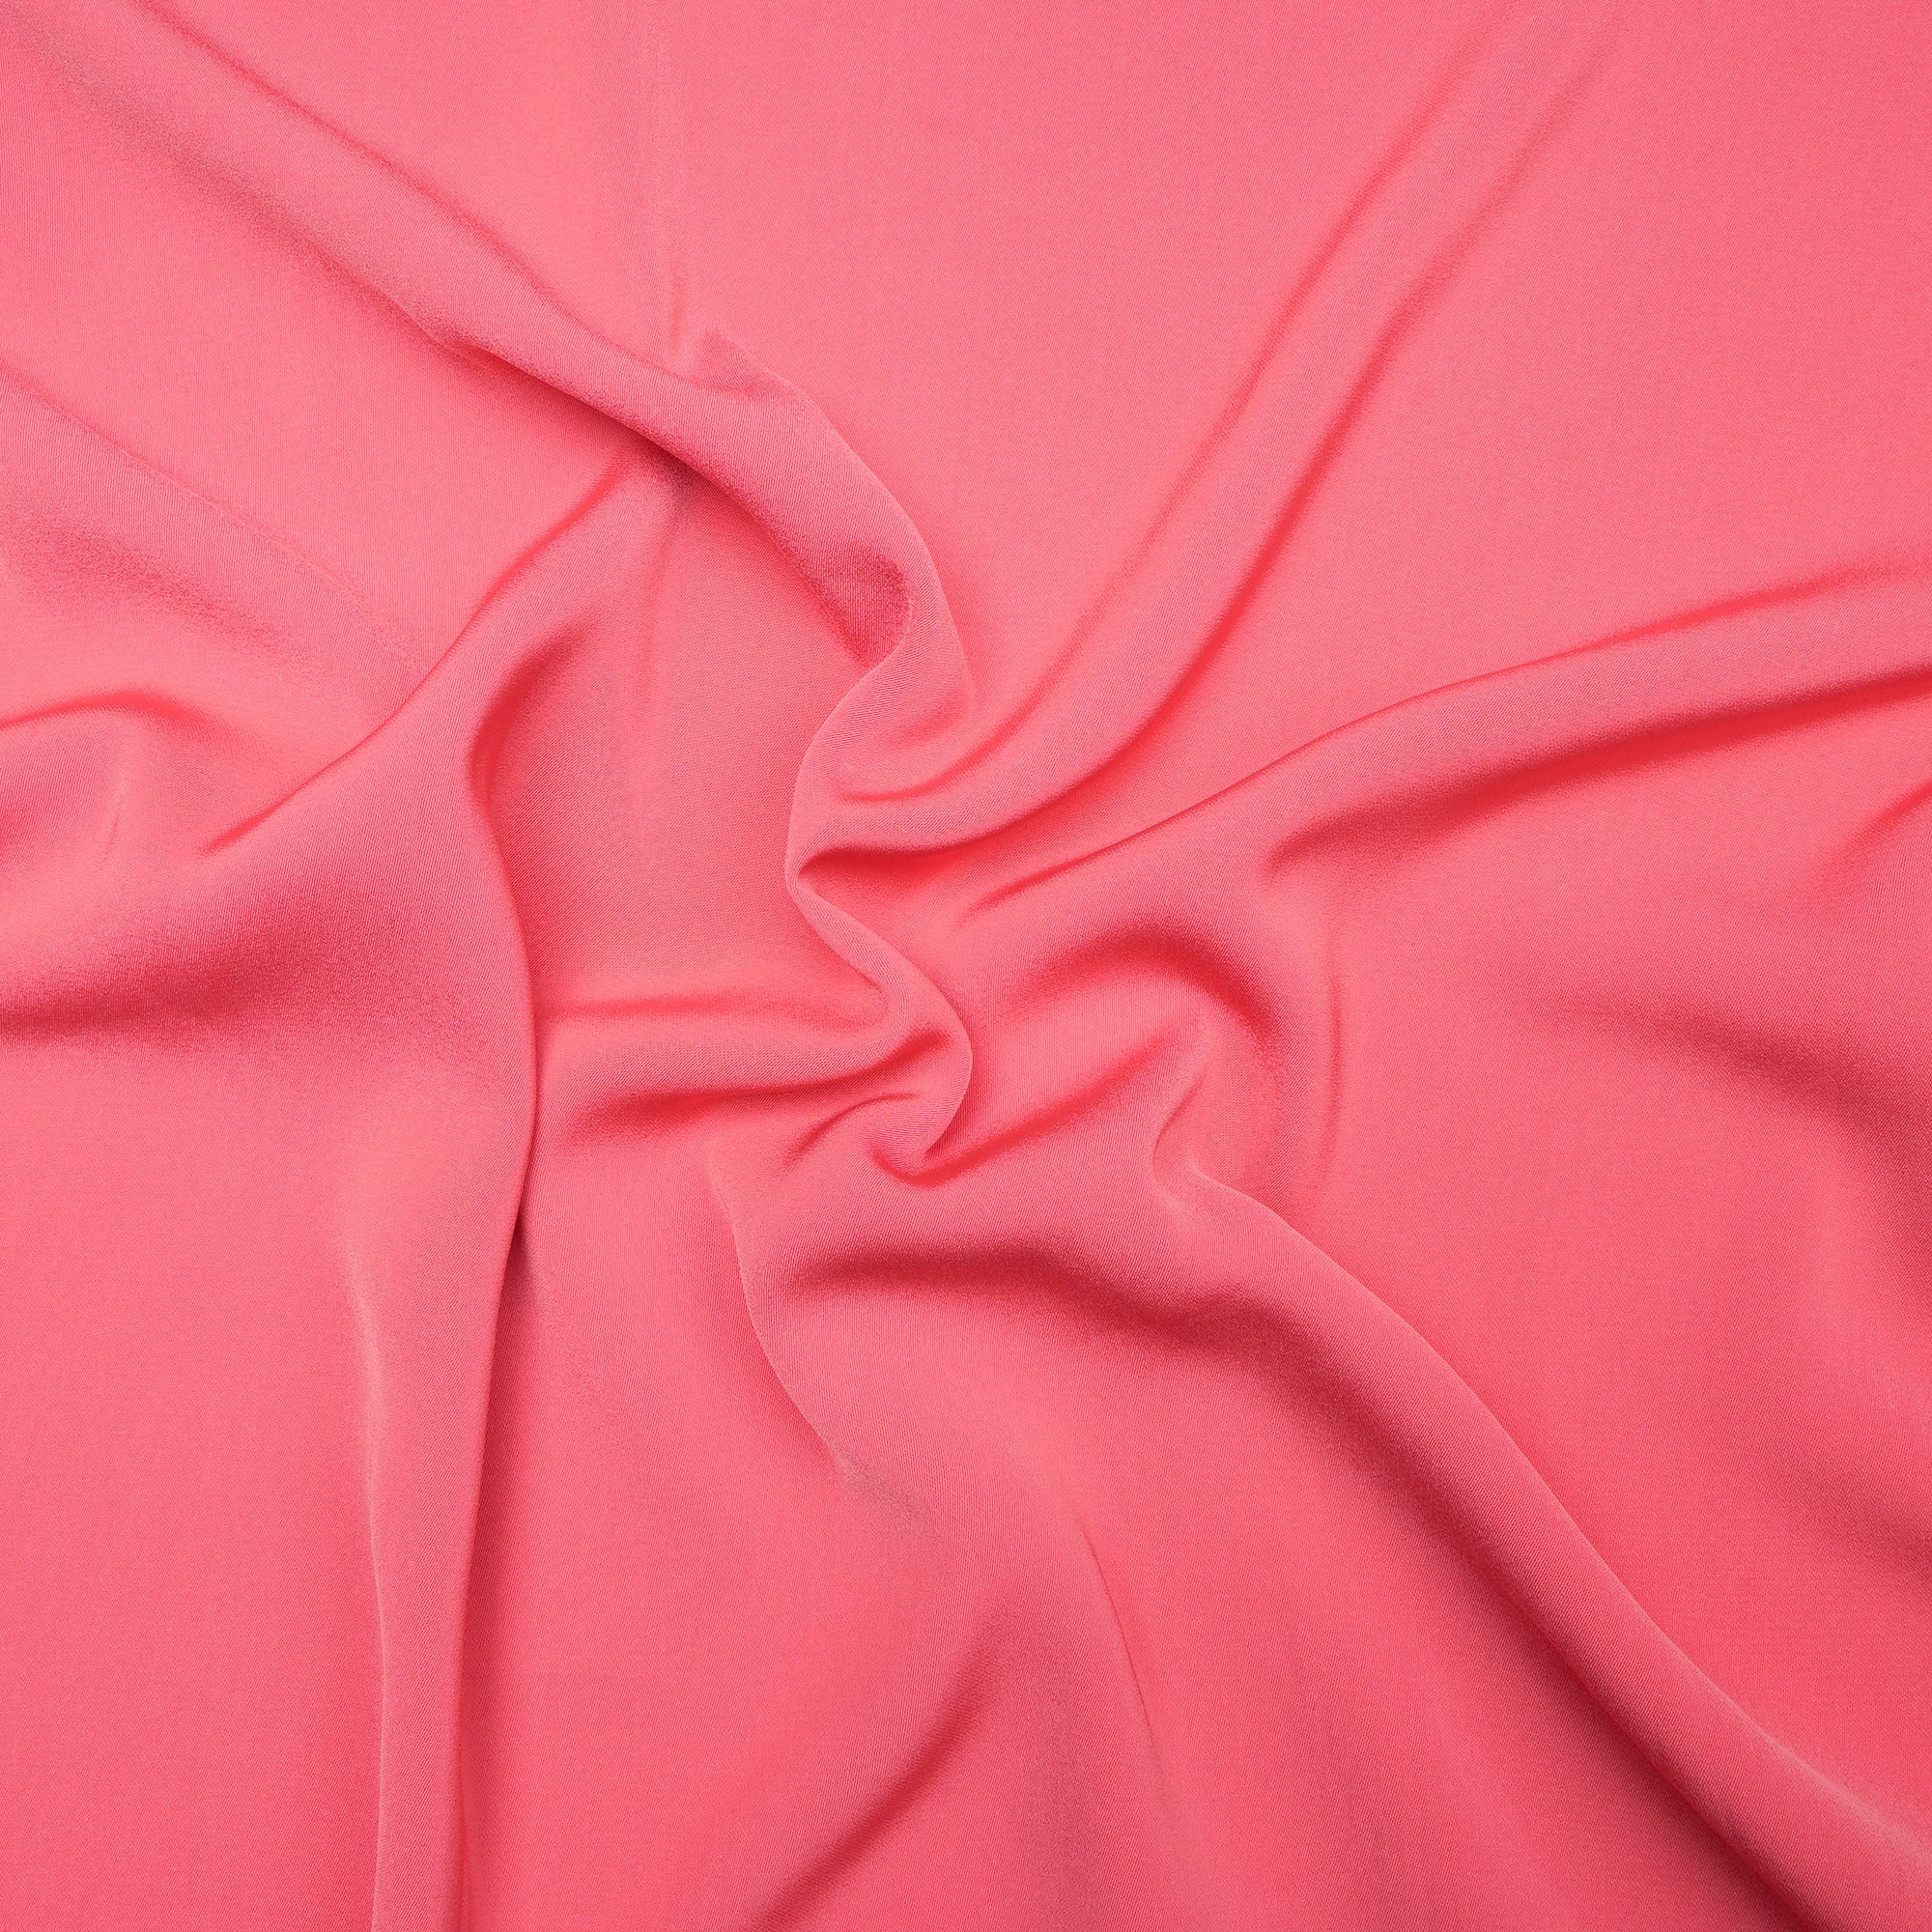 Calypso Coral Solid Dyed Imported Prada Crepe Fabric (60" Width)